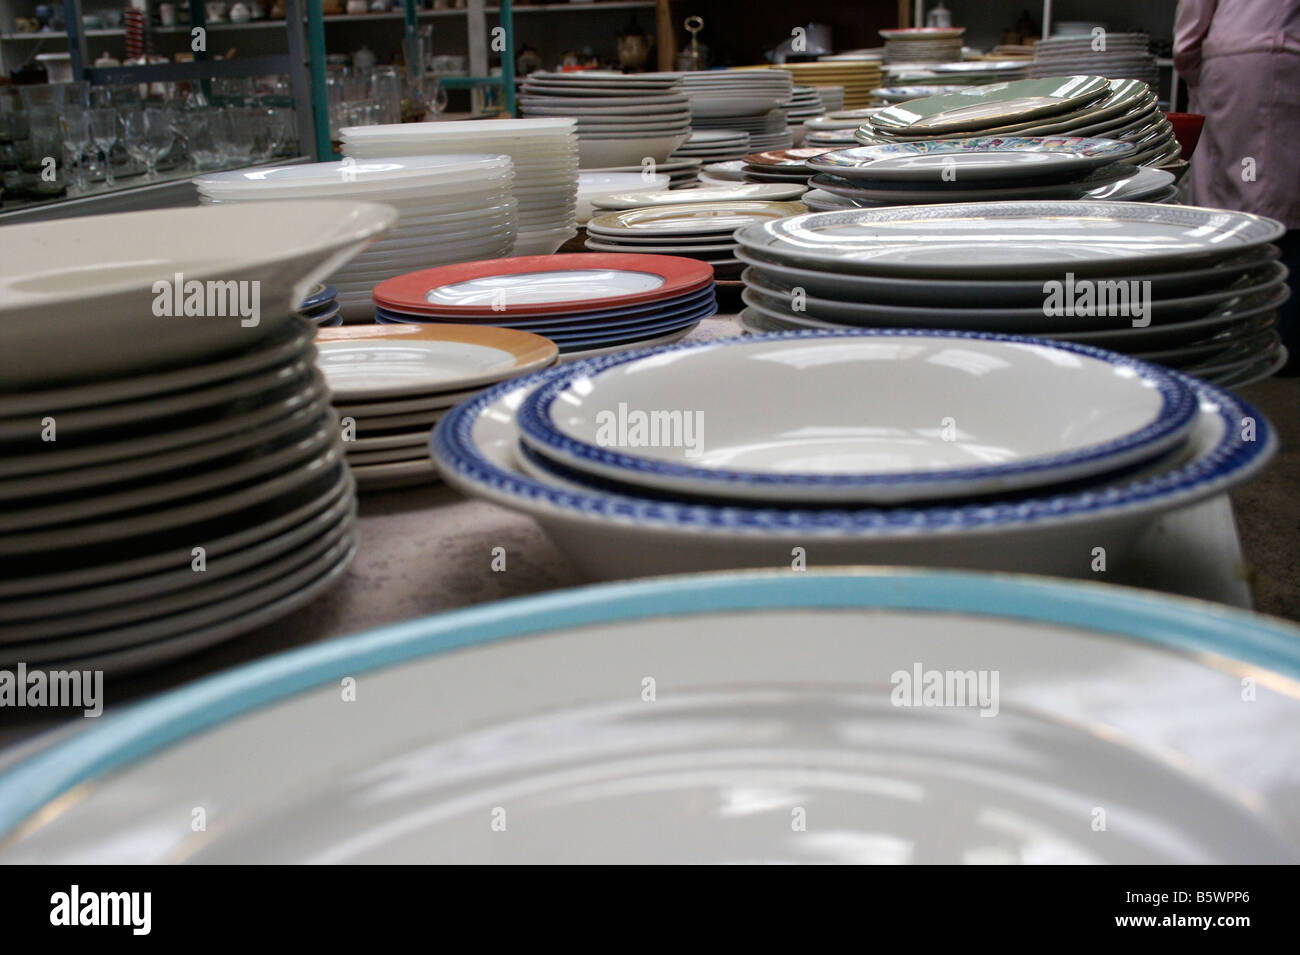 Plates. Old plates. Stock Photo